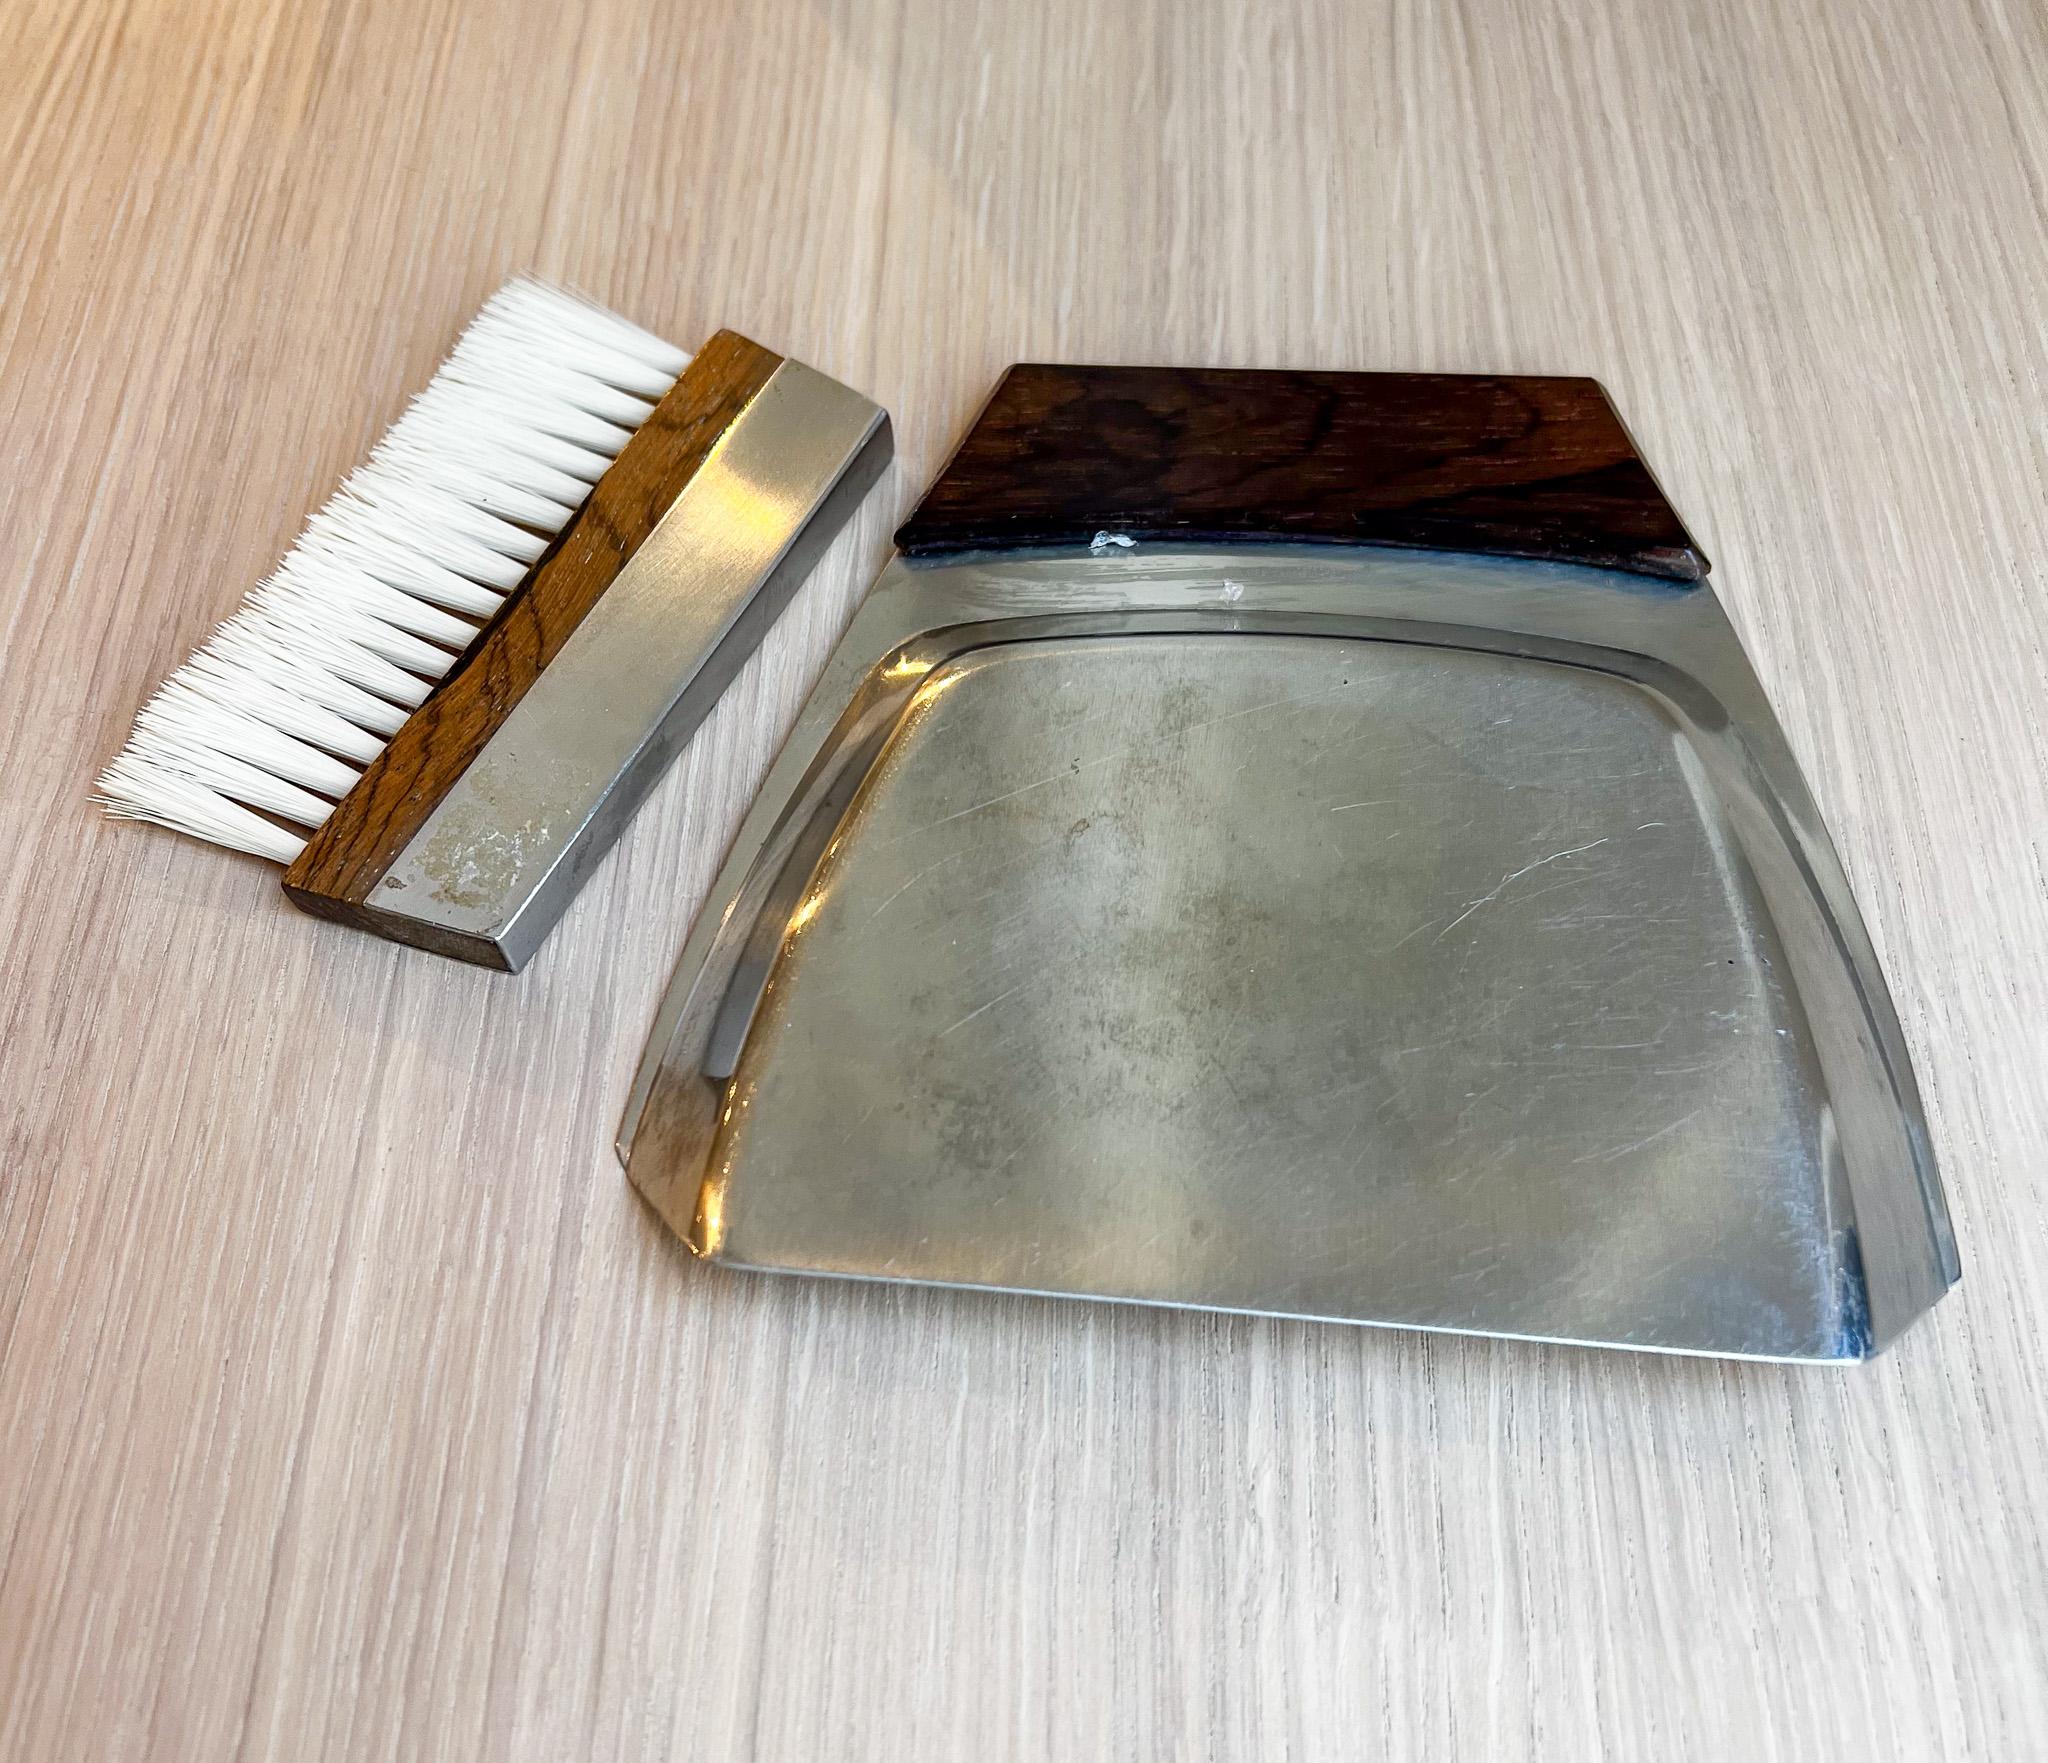 Available today, this Brazilian mid-century modern cleaning set by Hercules Inox is absolutely stunning! Made in the 1960’s, this cleaning set comes with a miniature shovel and brush and is perfect for cleaning. The shovel is made with an iron blade